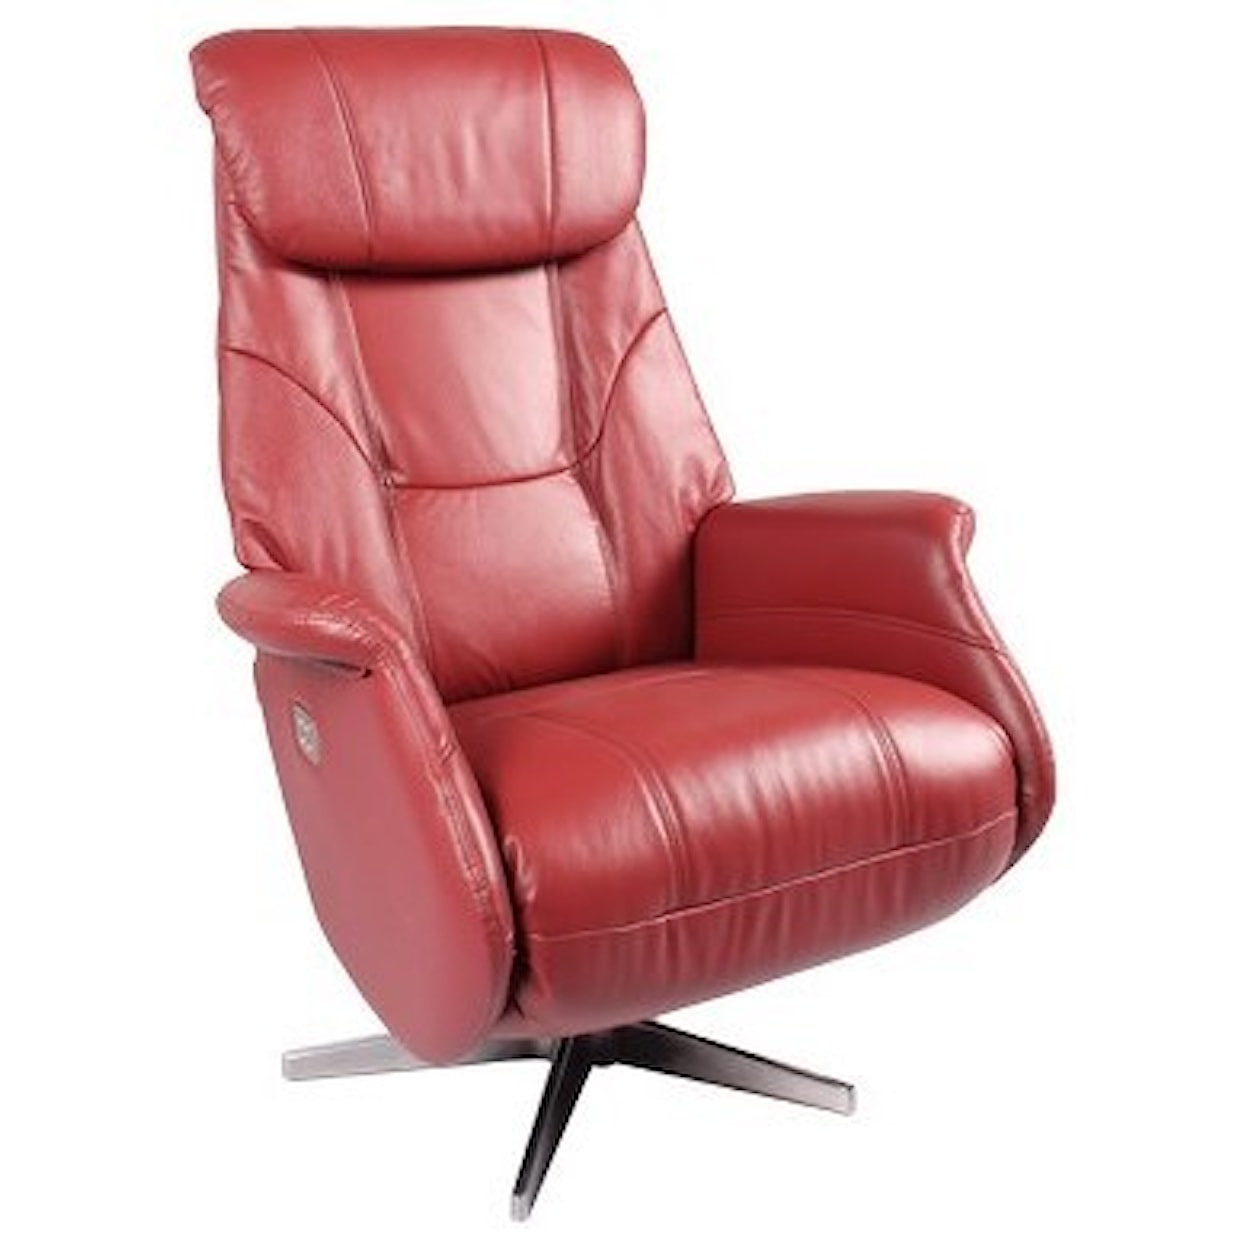 Benchmaster Monarch Power Reclining Chair